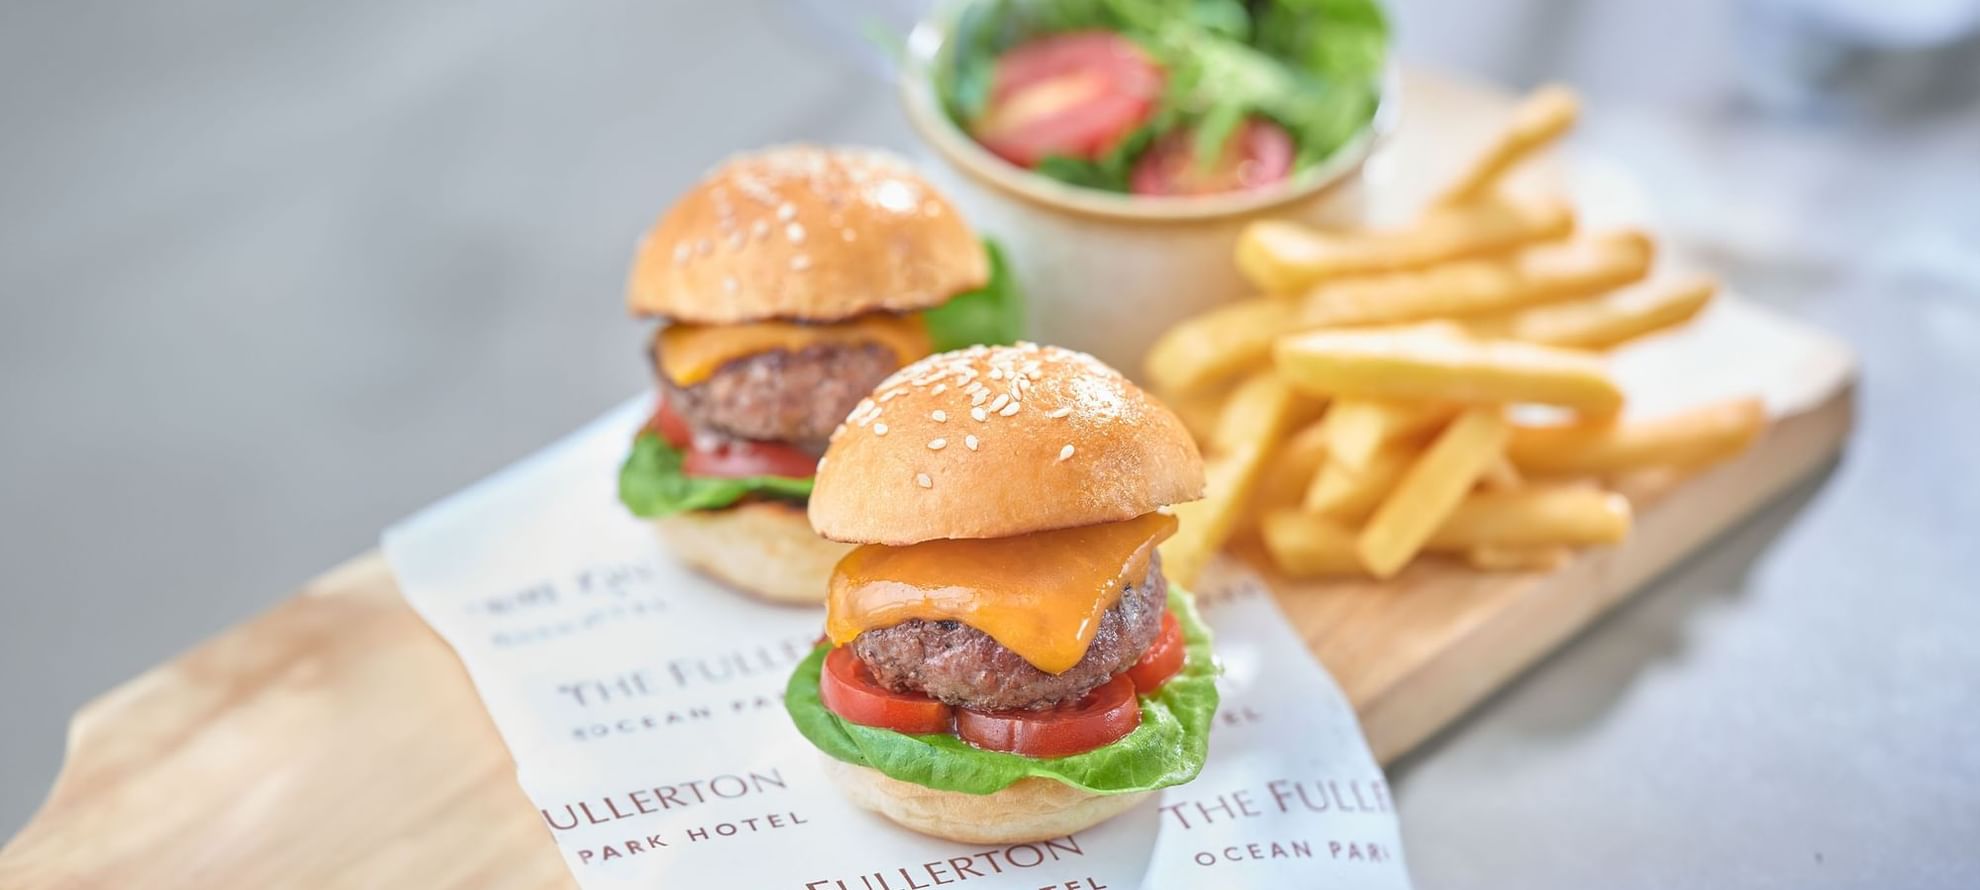 Burgers and fries served on a charcuterie board at Fullerton Ocean Park